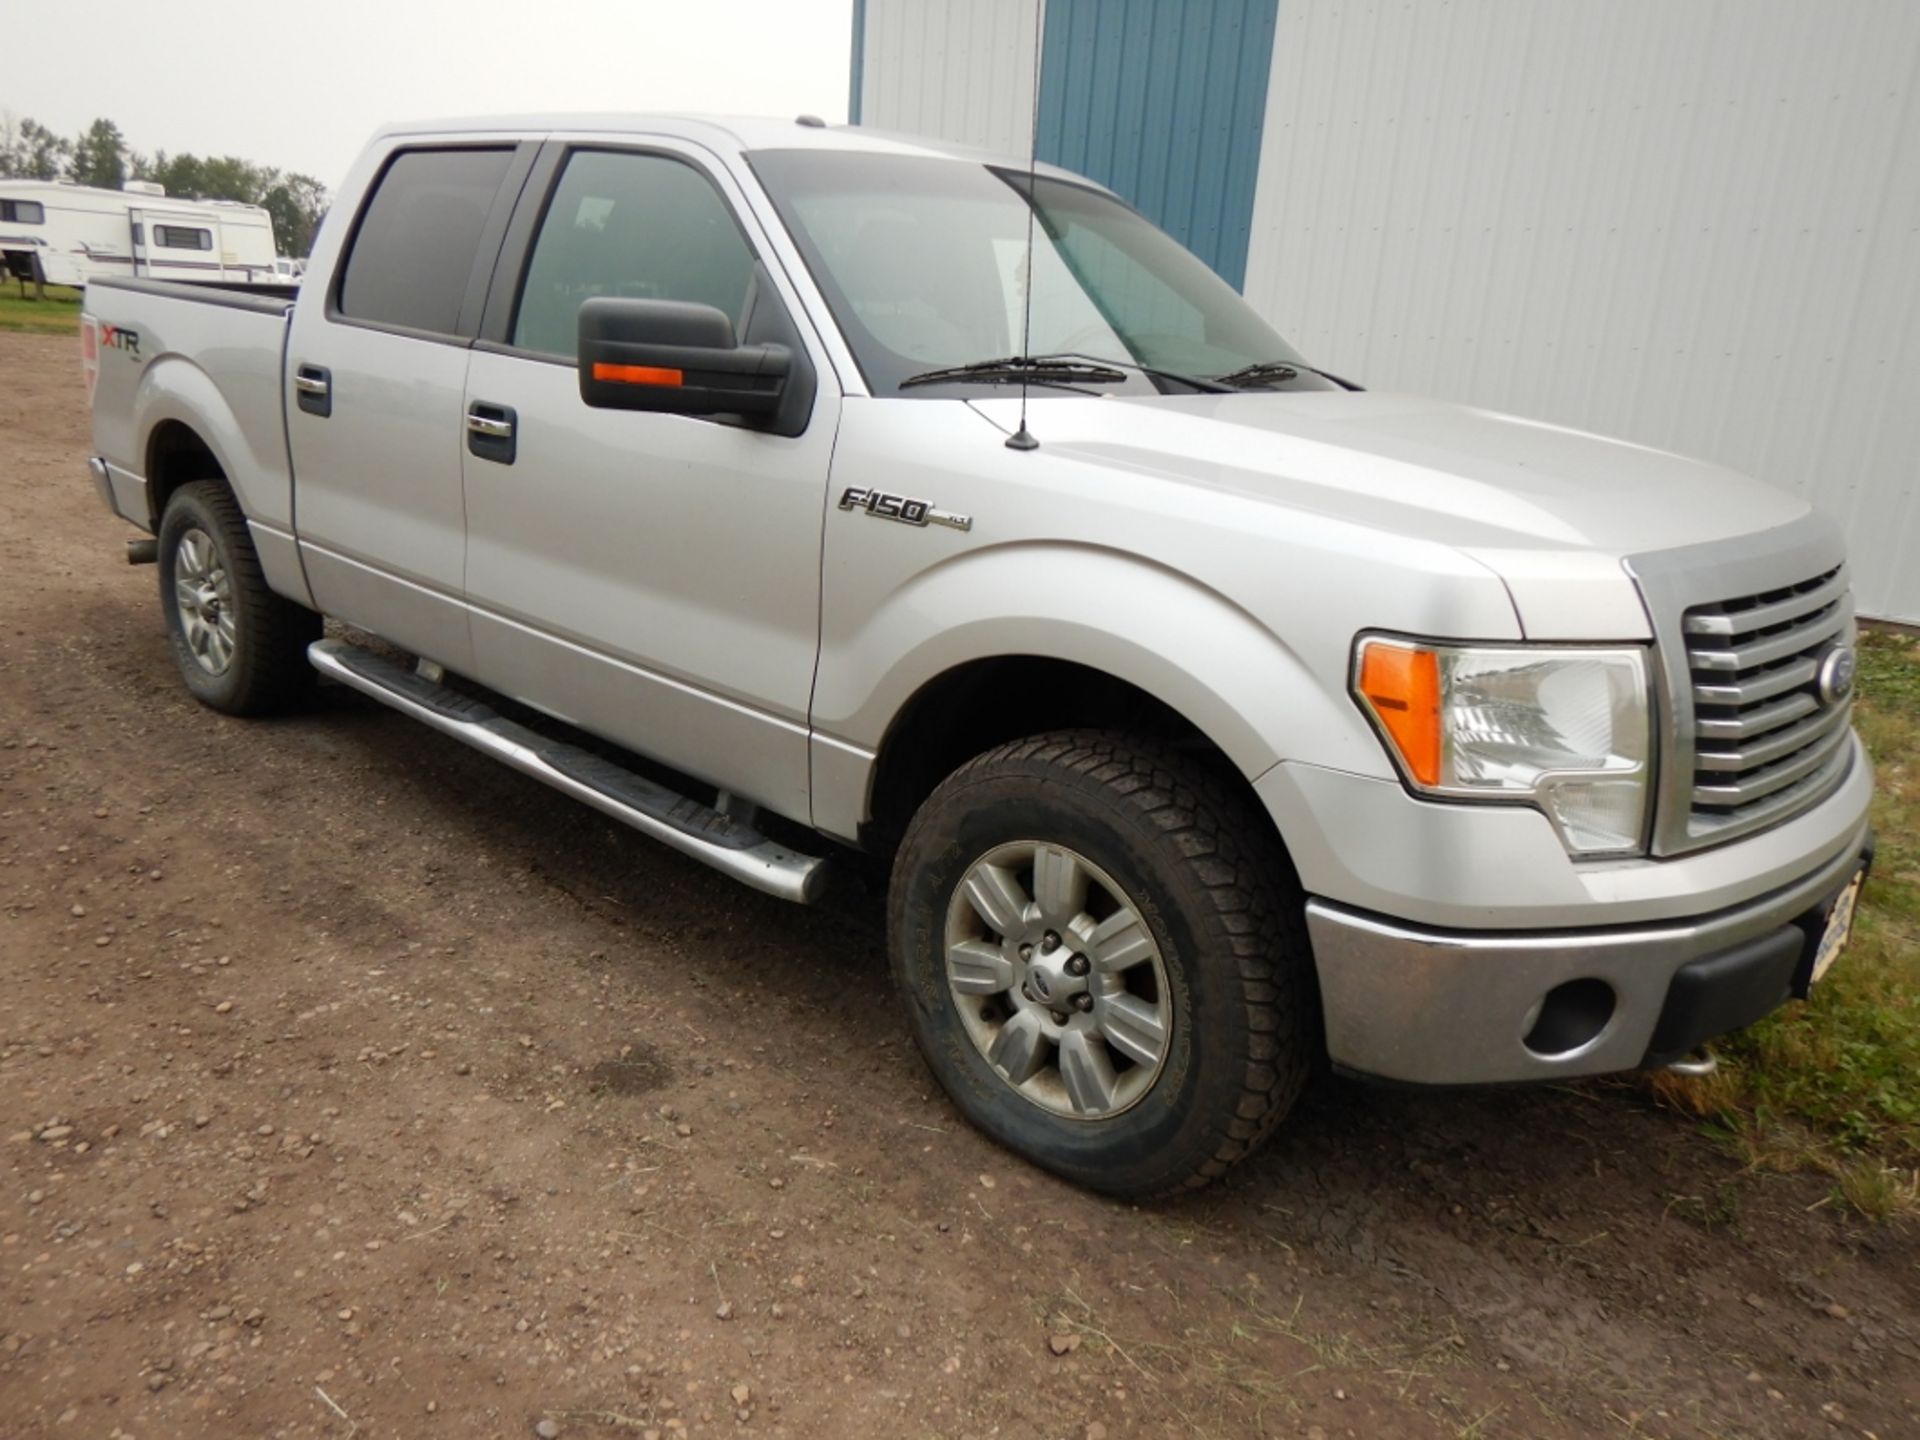 2011 FORD F-150 XTR P/U, 5.4L V8, 4X4, CREW CAB, SHORT BOX, CLOTH INT., A/T, 190,651 KM'S SHOWING, - Image 9 of 22